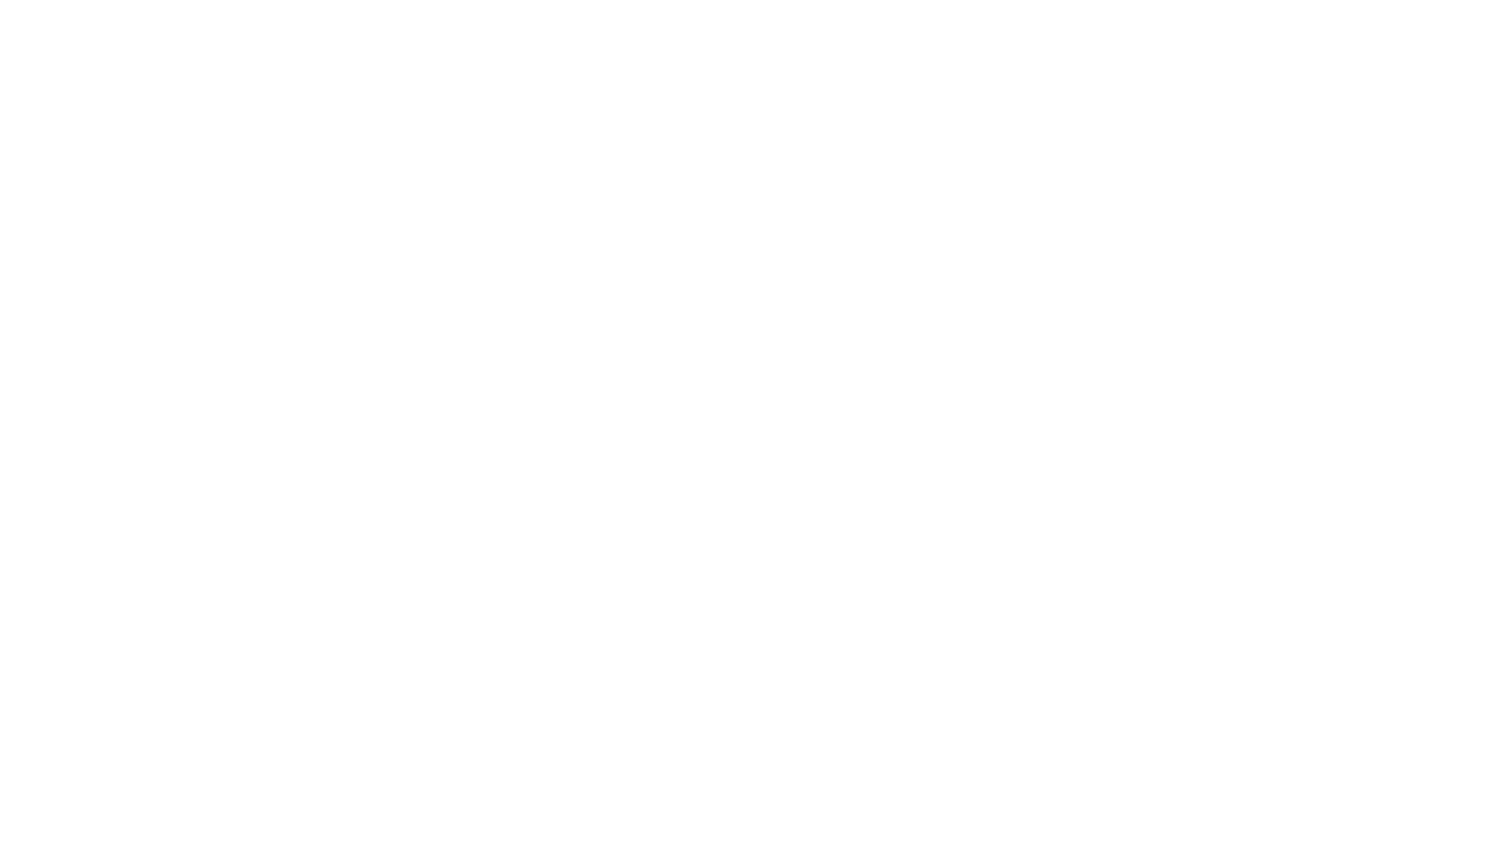 RNG RD 632 Candle Co. 